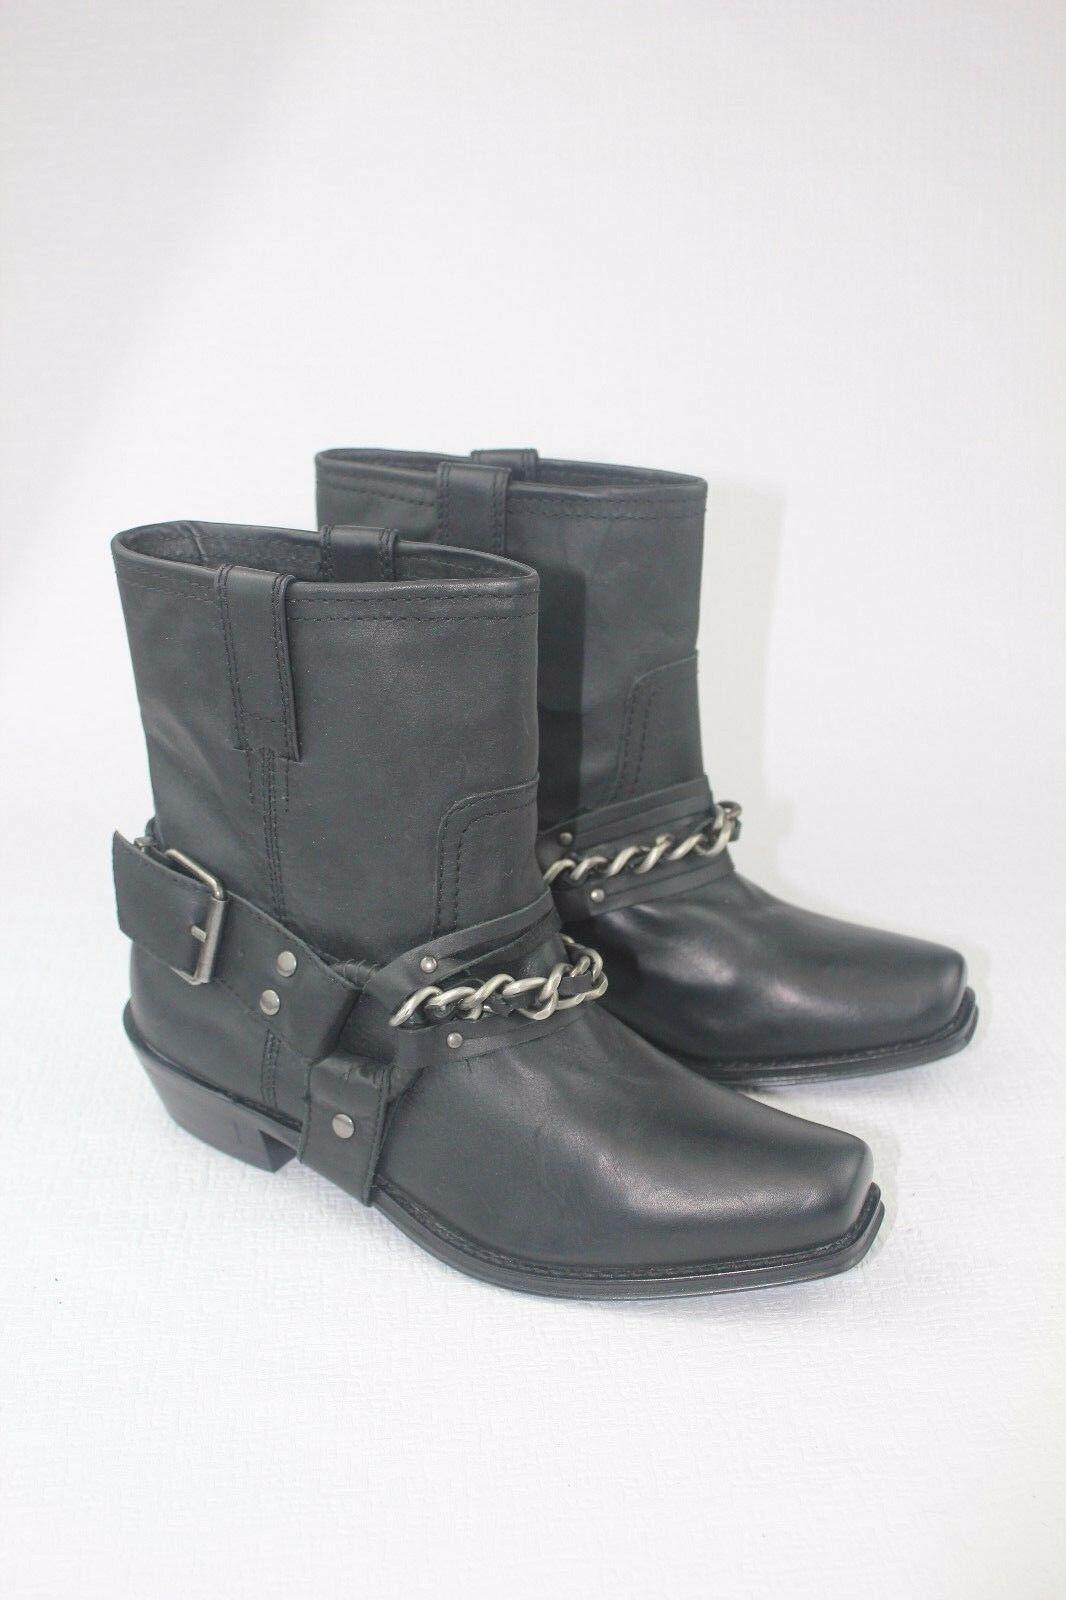 Juicy Couture  Darby Chain-Harness Boot Size 7.5 - SVNYFancy